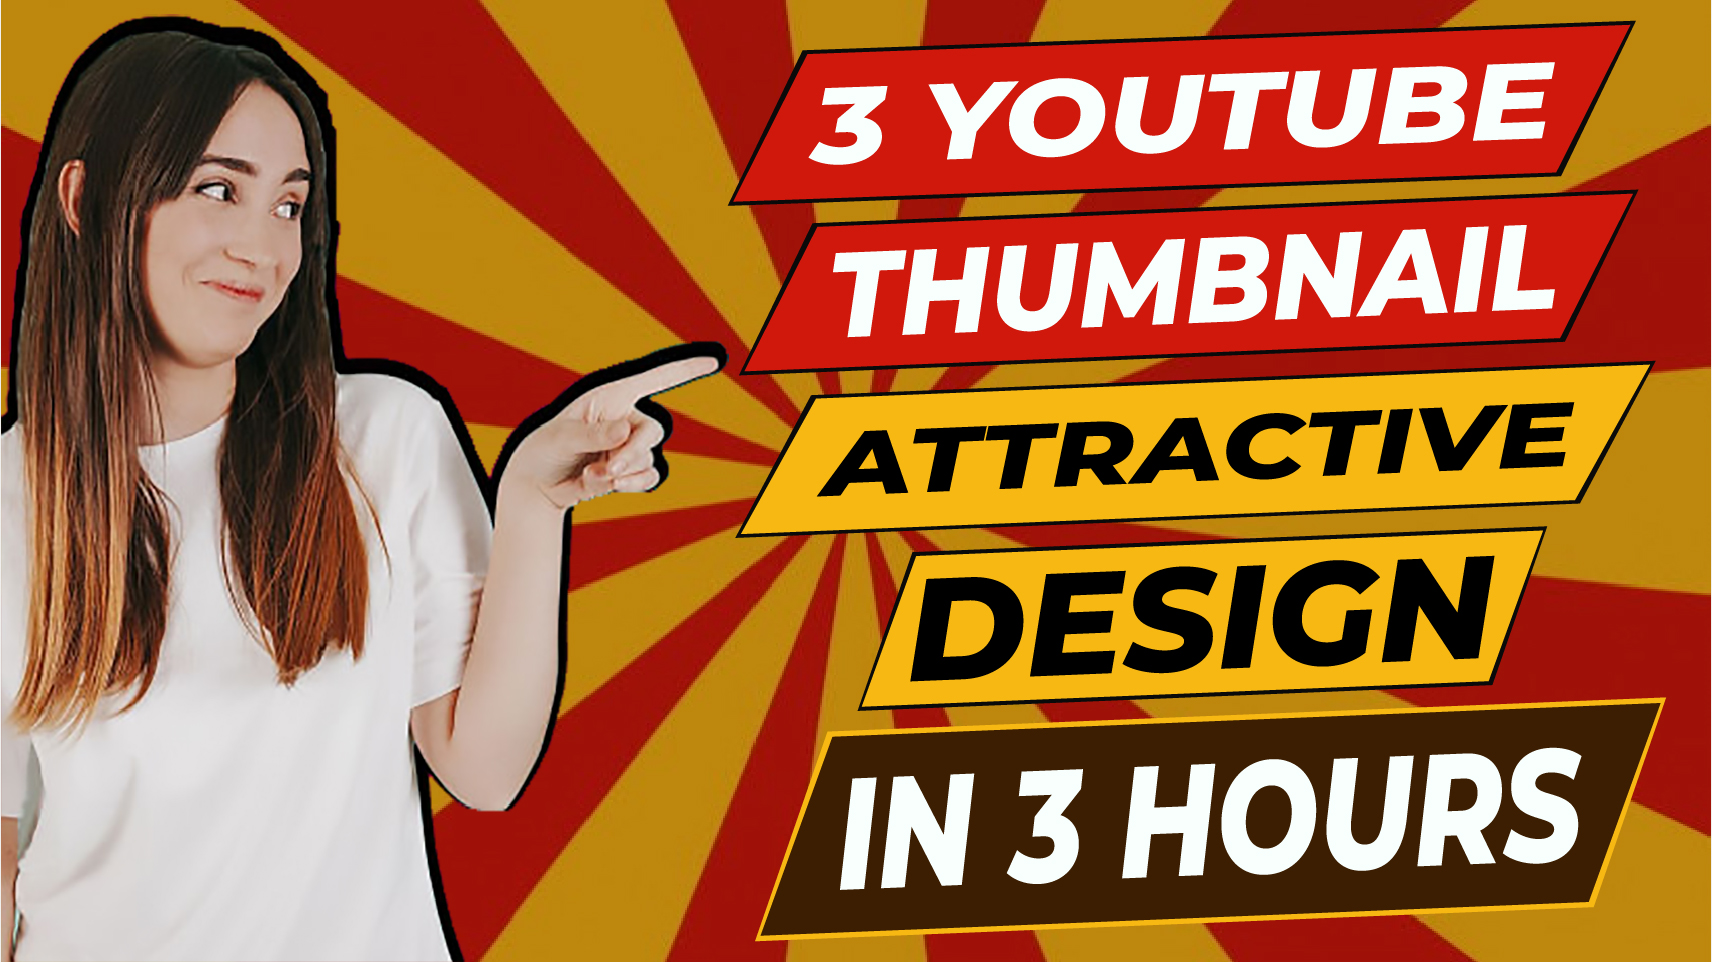 I will create design catchy youtube thumbnail for you within 2 hours